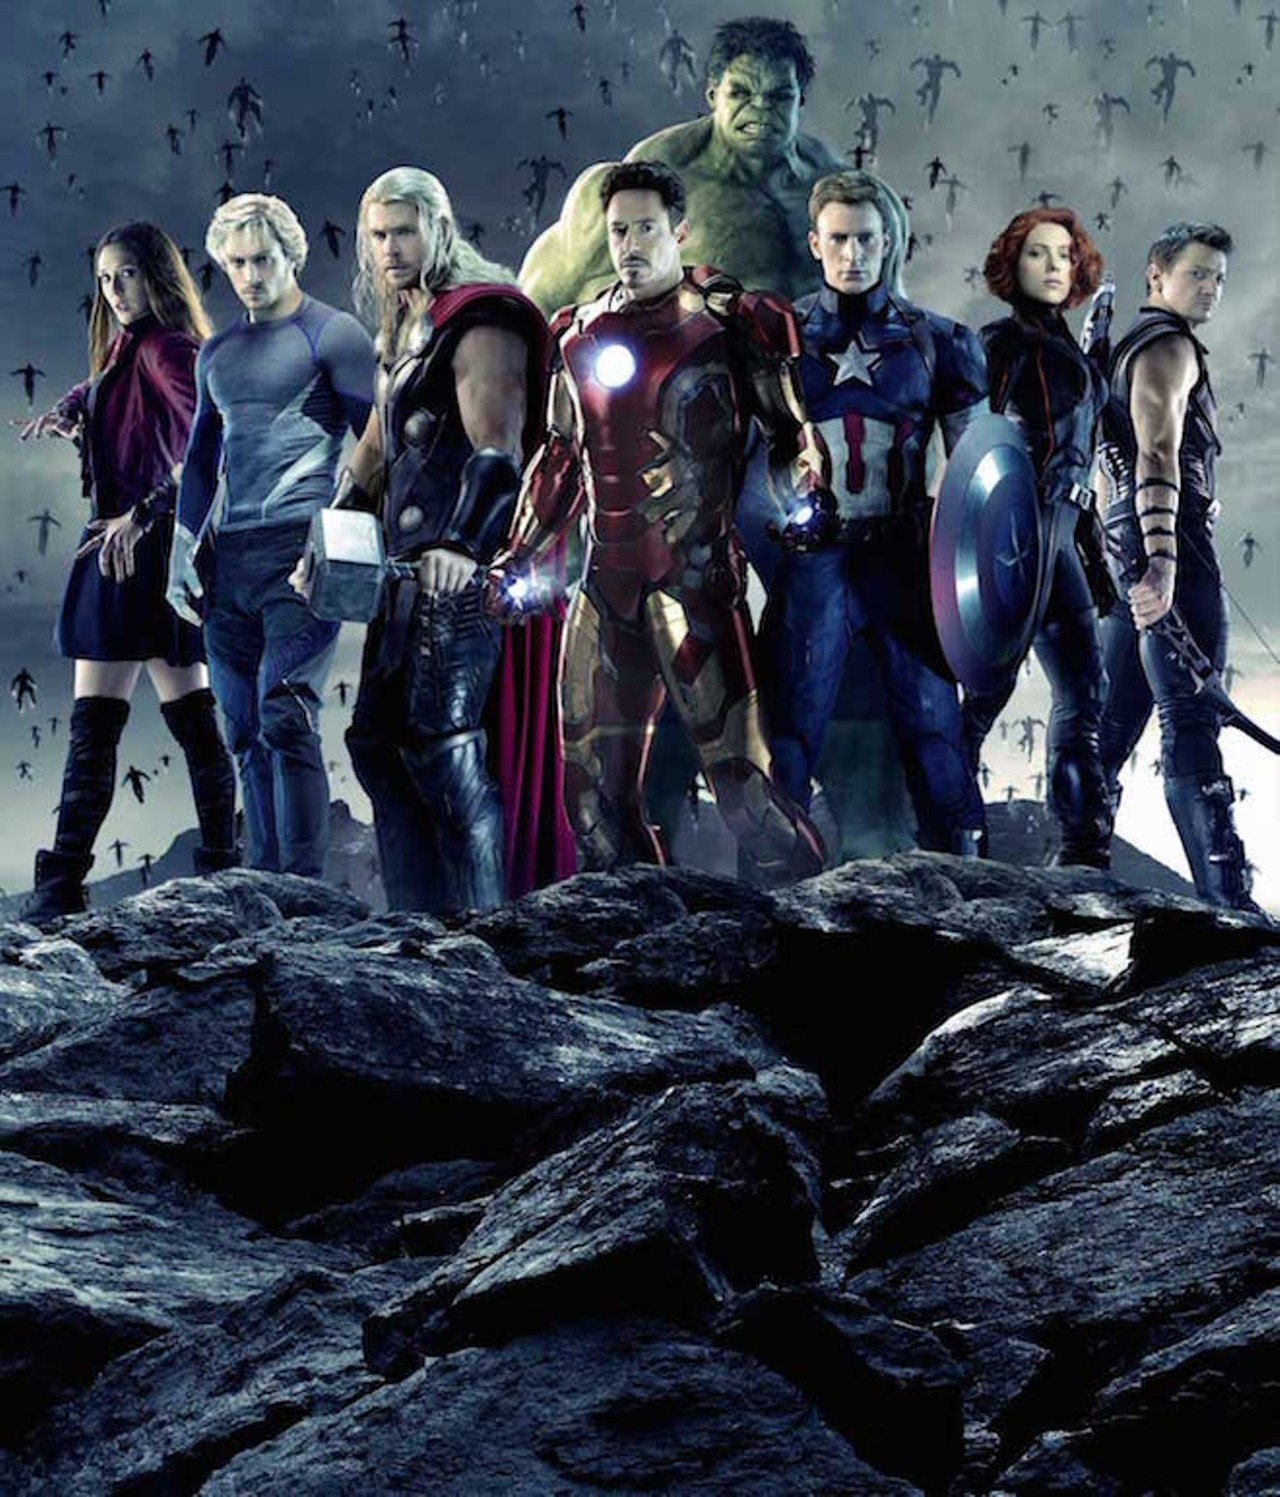 Opening Friday, May 1Avengers 2: Age of Ultron